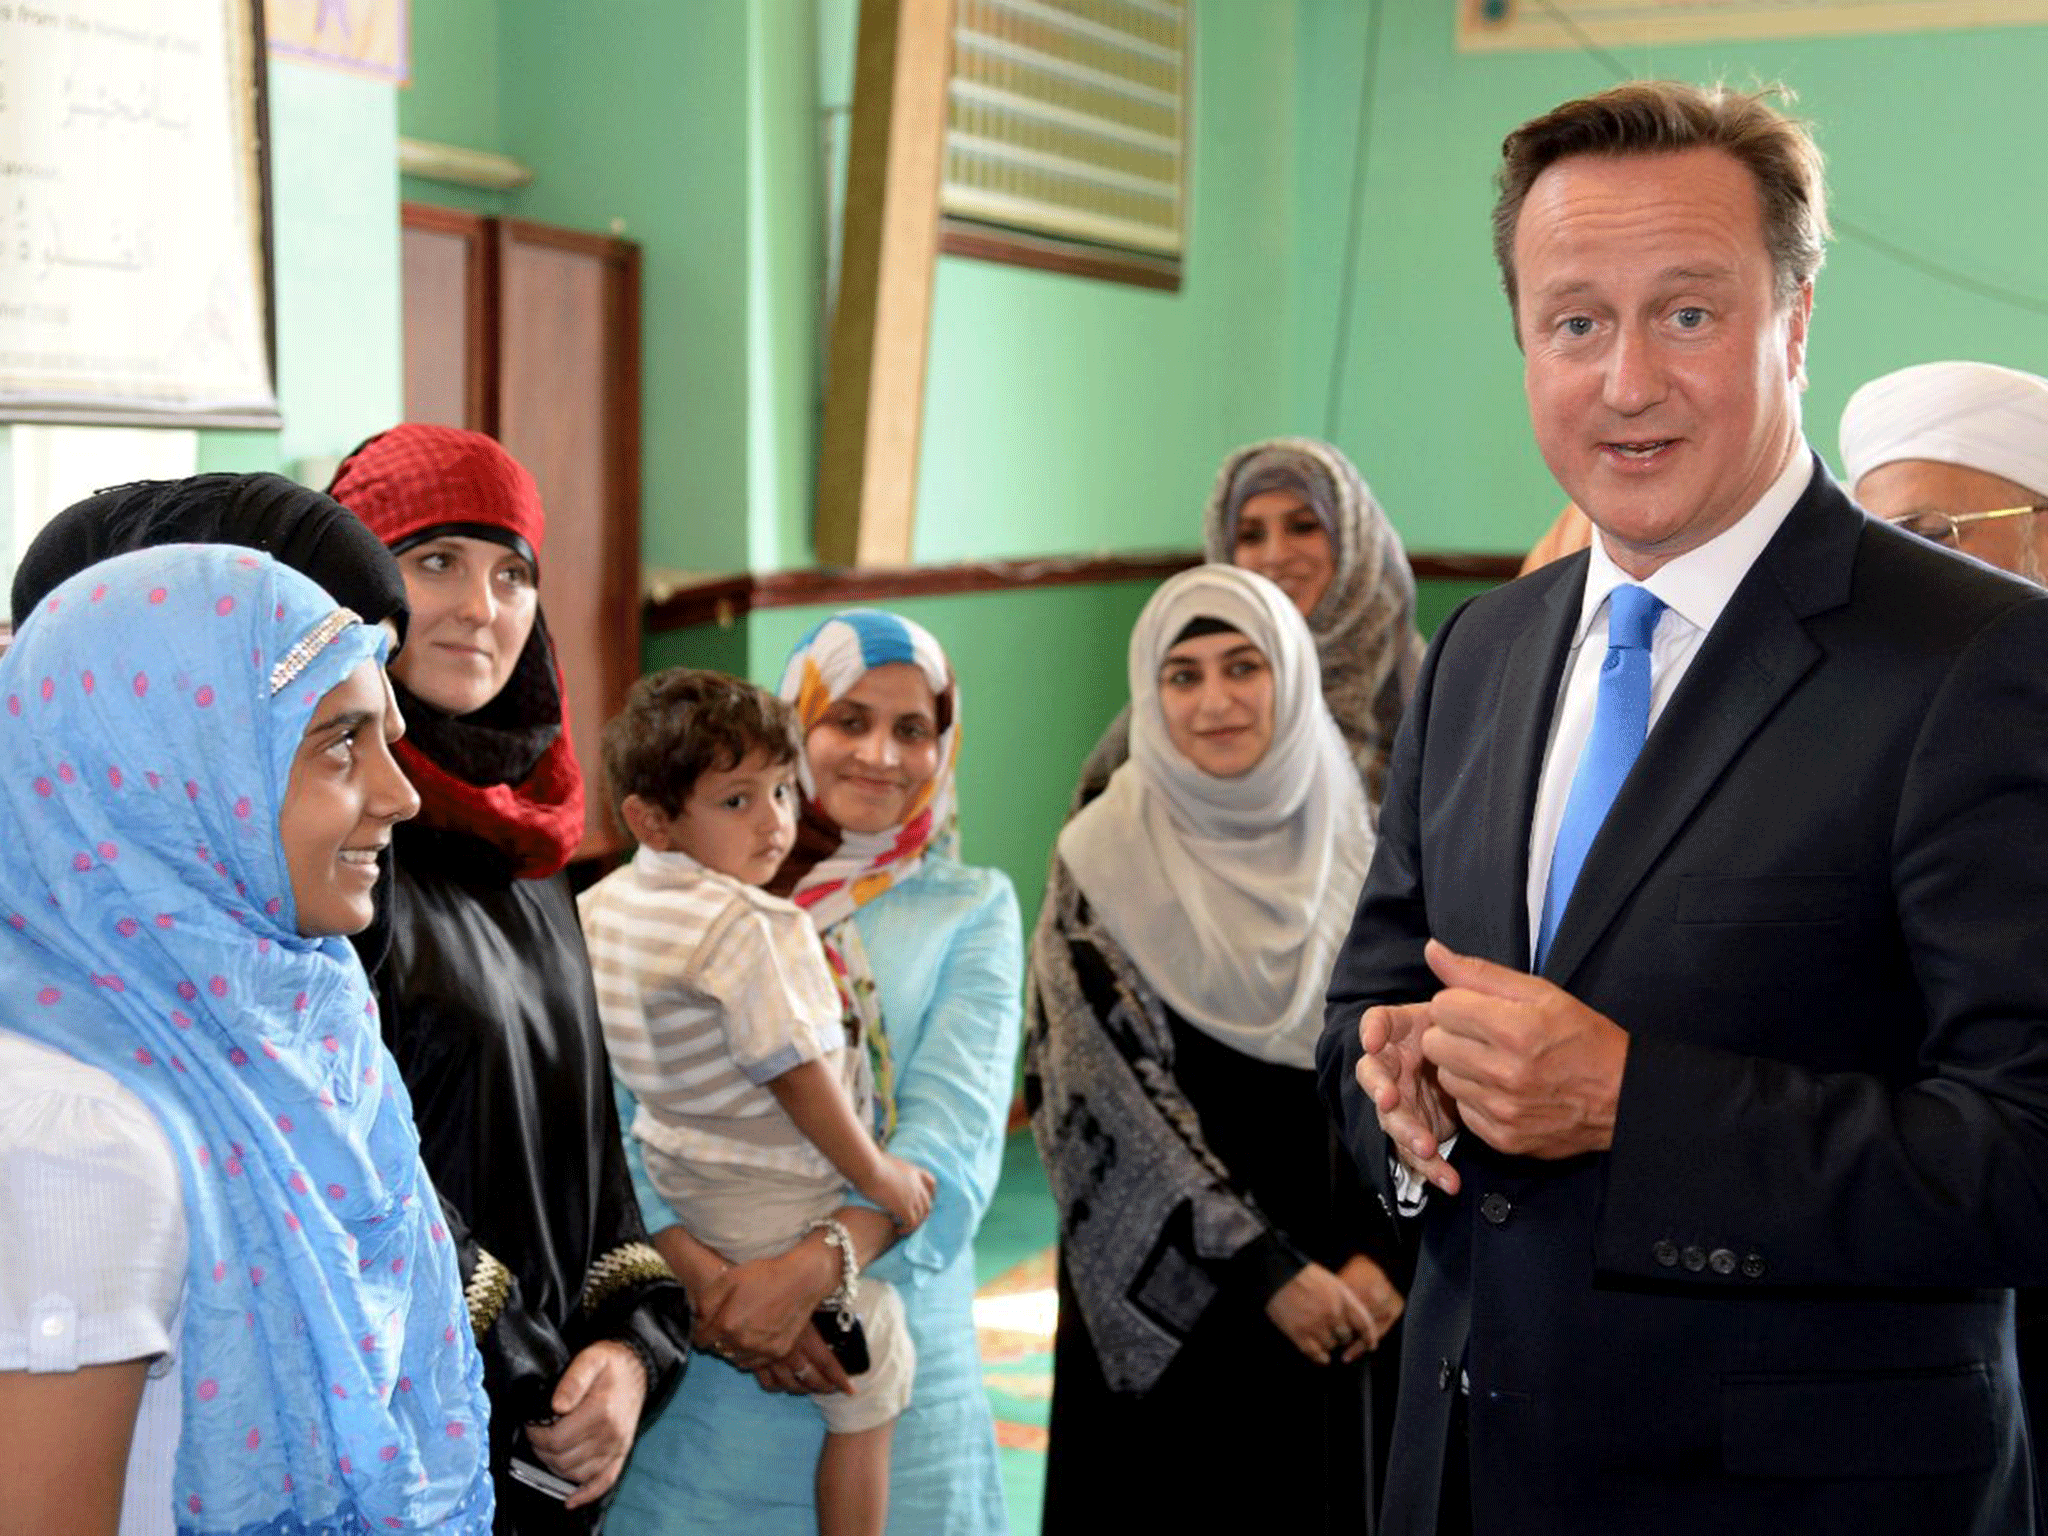 Young Muslim women speak to David Cameron at the Jamia Masjid mosque in Manchester in 2013. He has said Muslim women who cannot speak English will be 'susceptible' to Isis